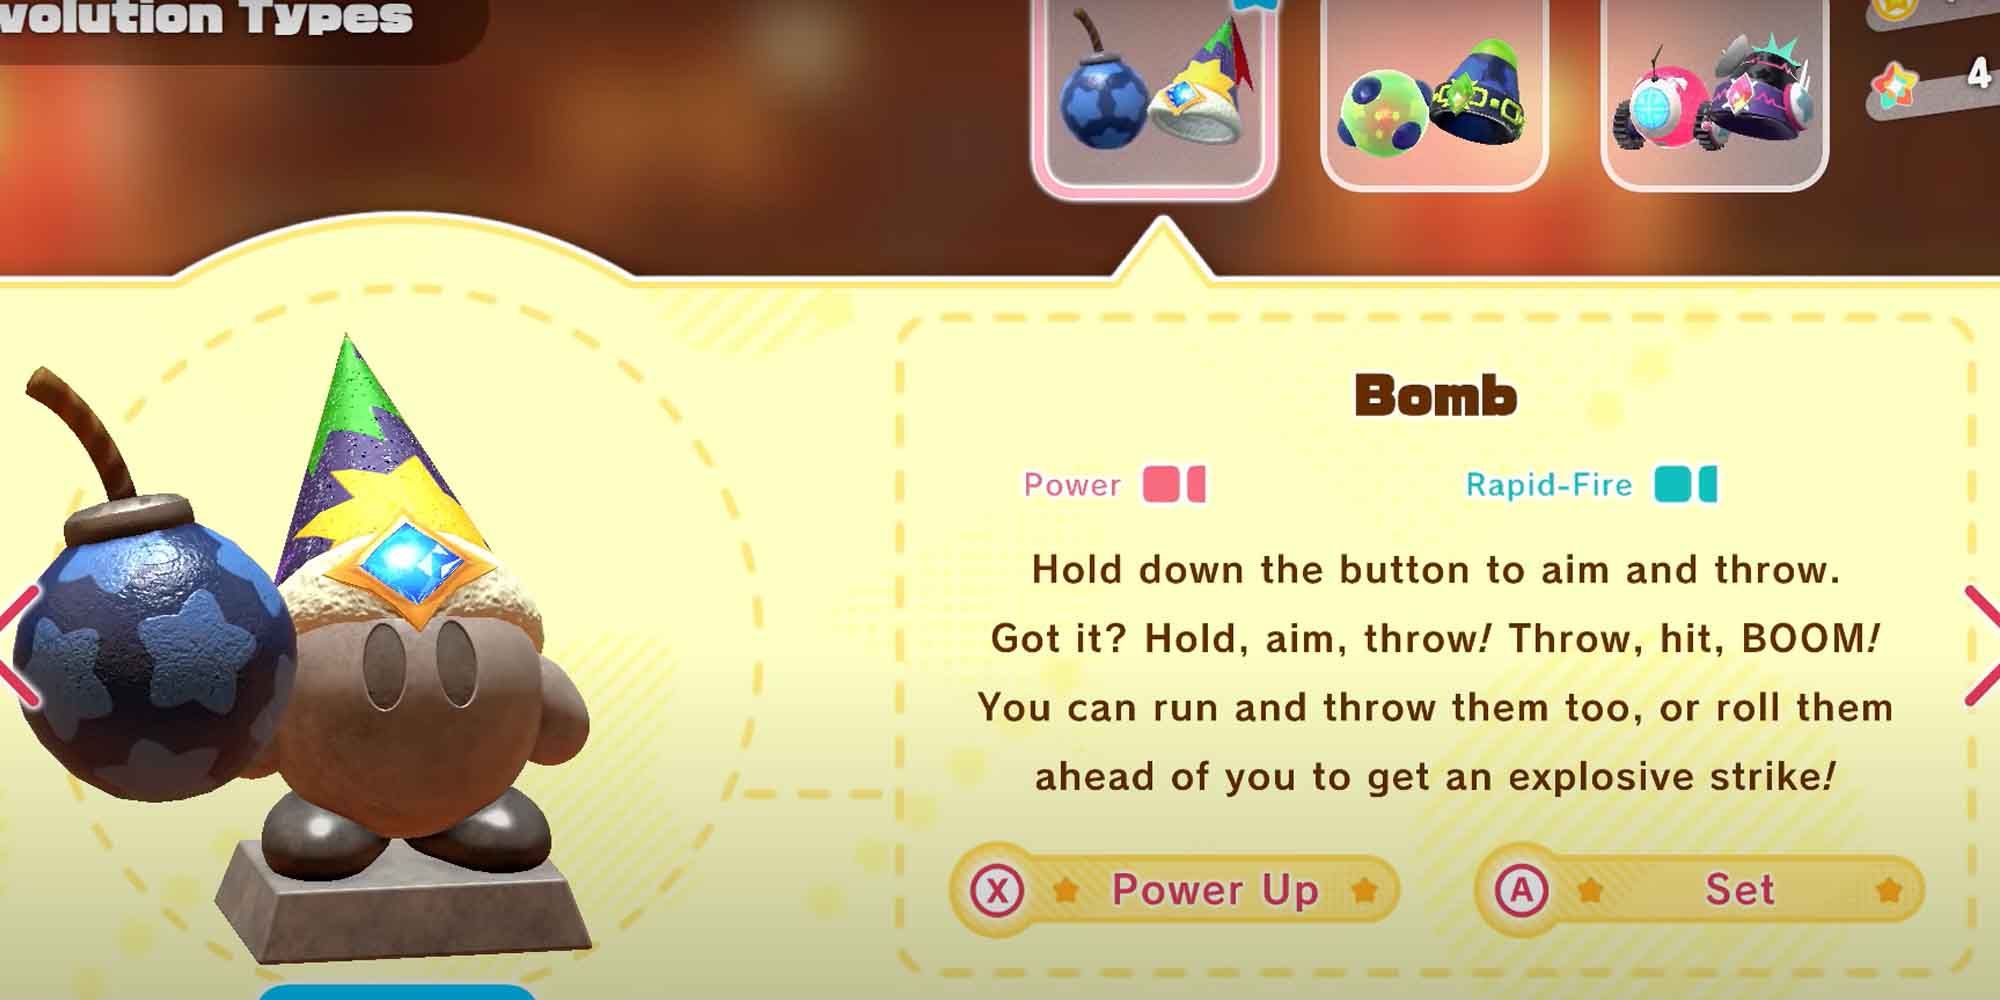 The Bomb copy ability in Kirby in The Forgotten Land